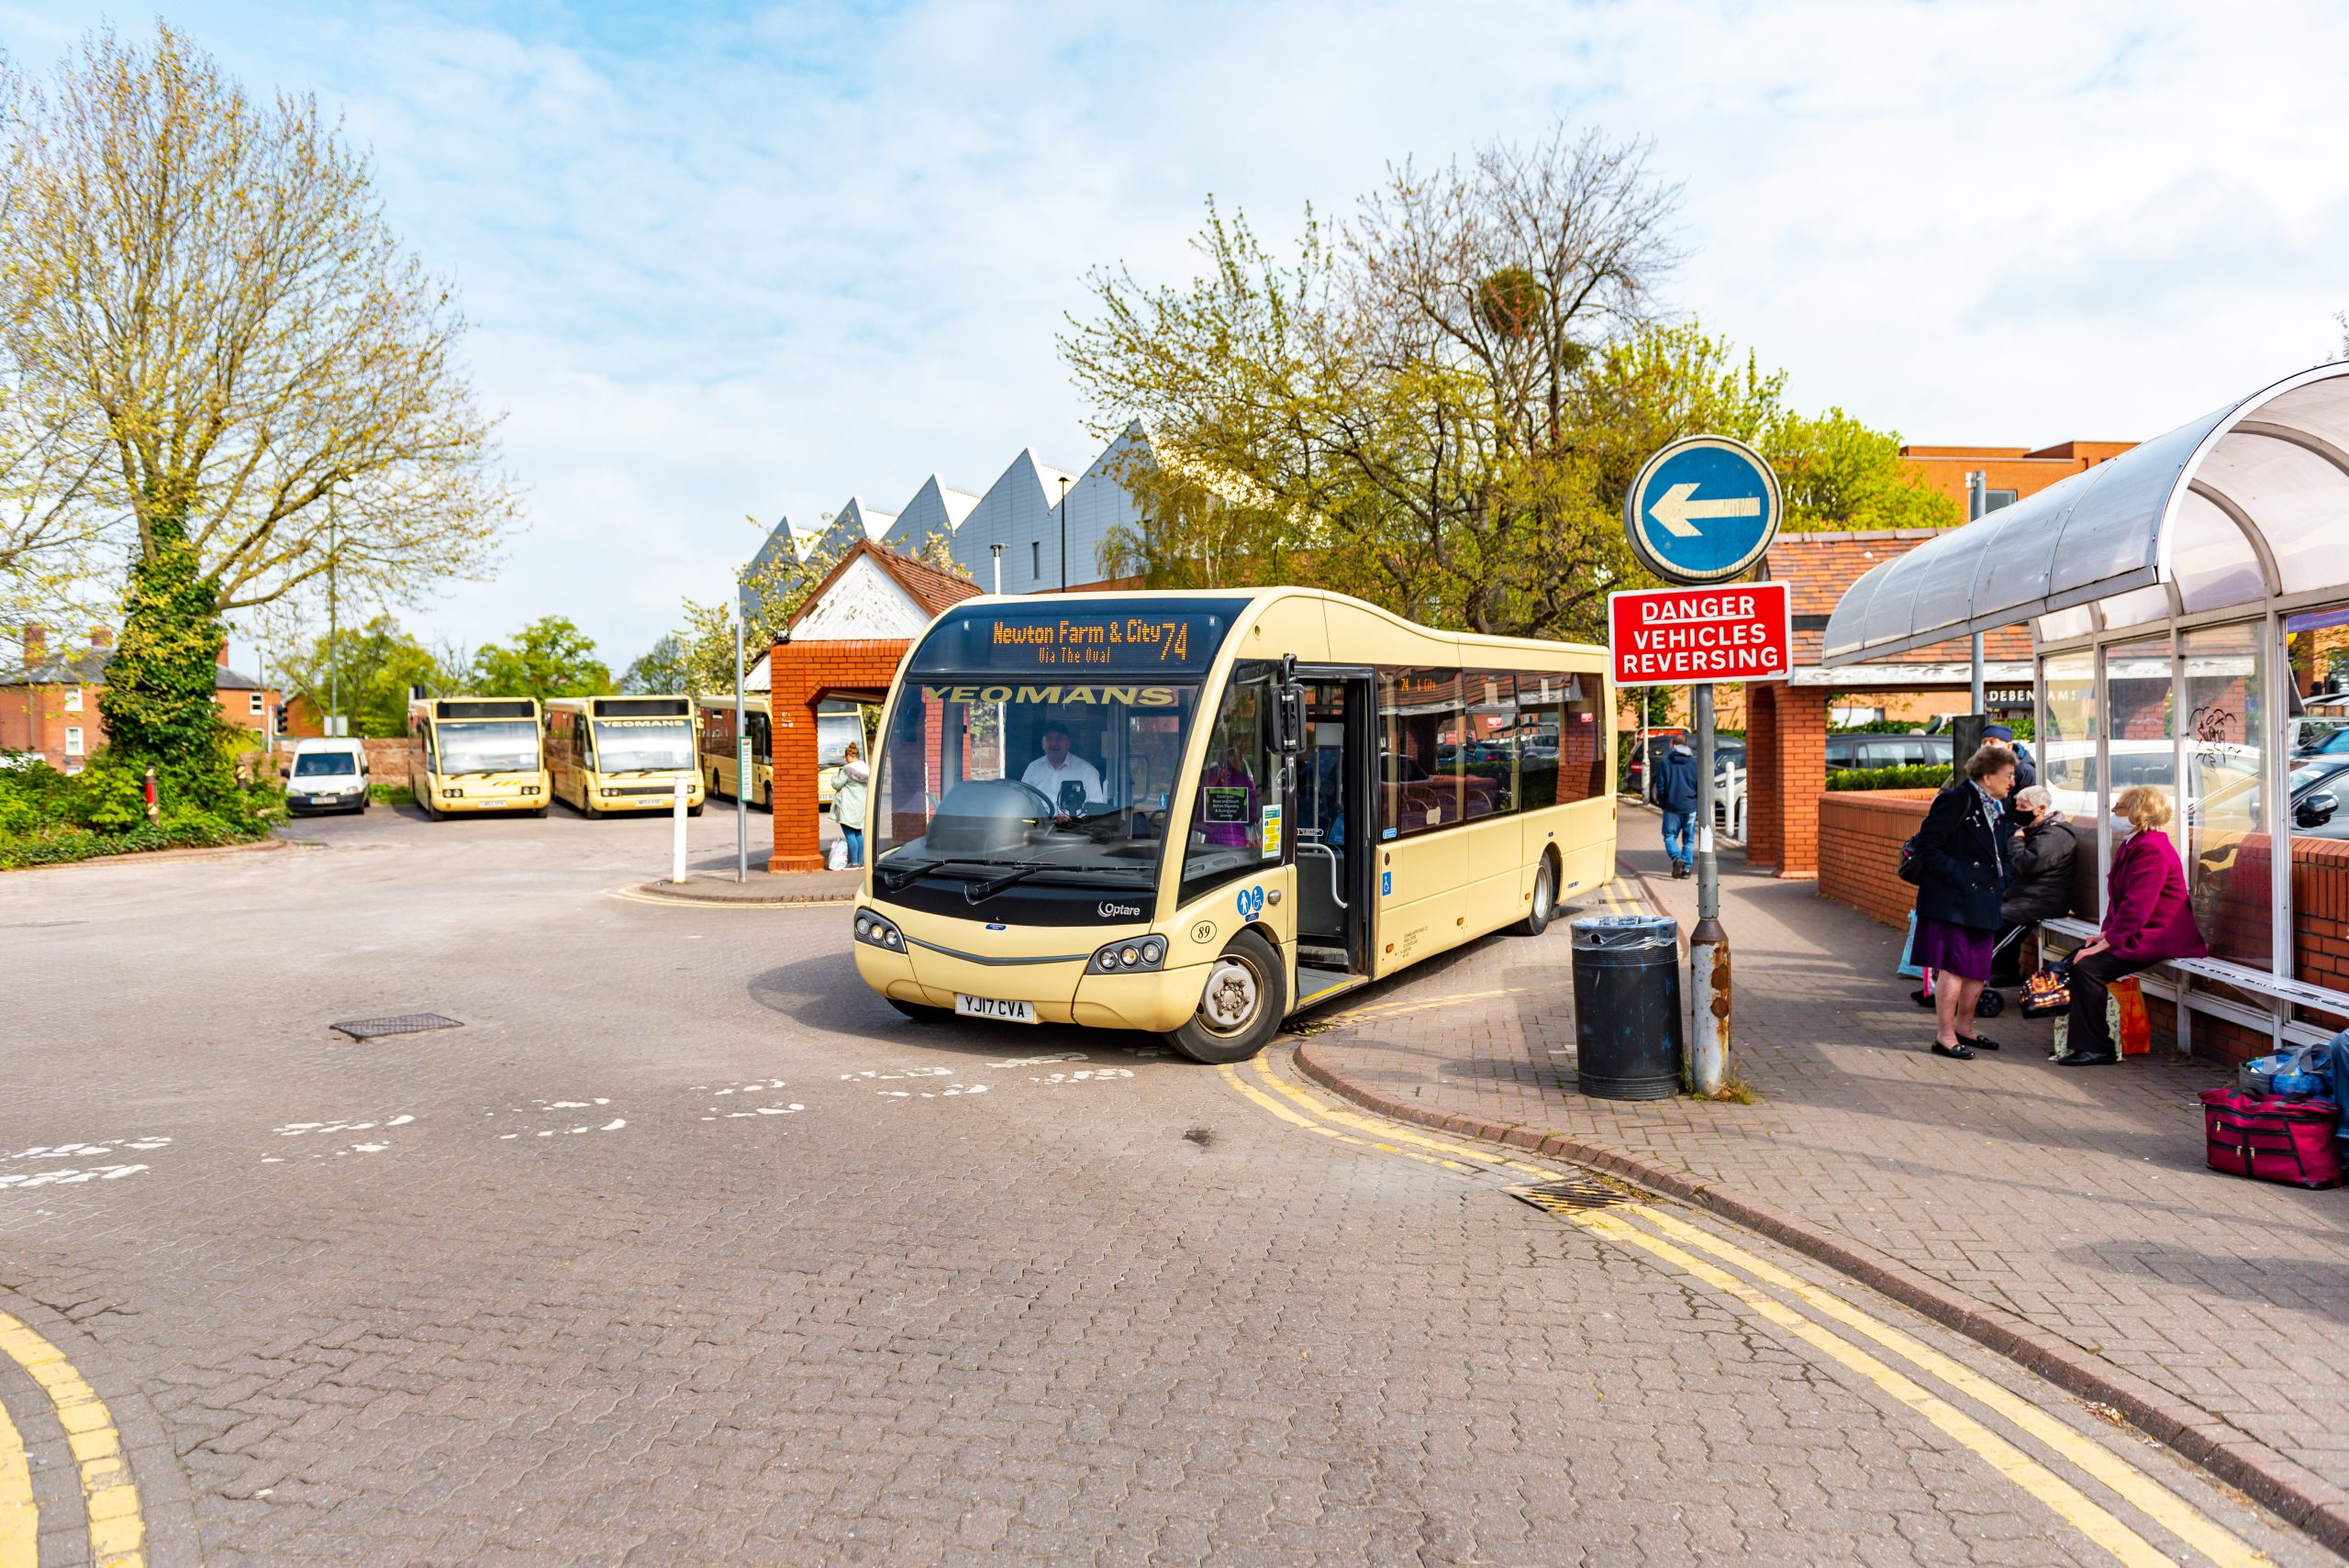 NEWS | Create your own ‘bus-it list’ and experience more of Herefordshire says Councillor Harrington